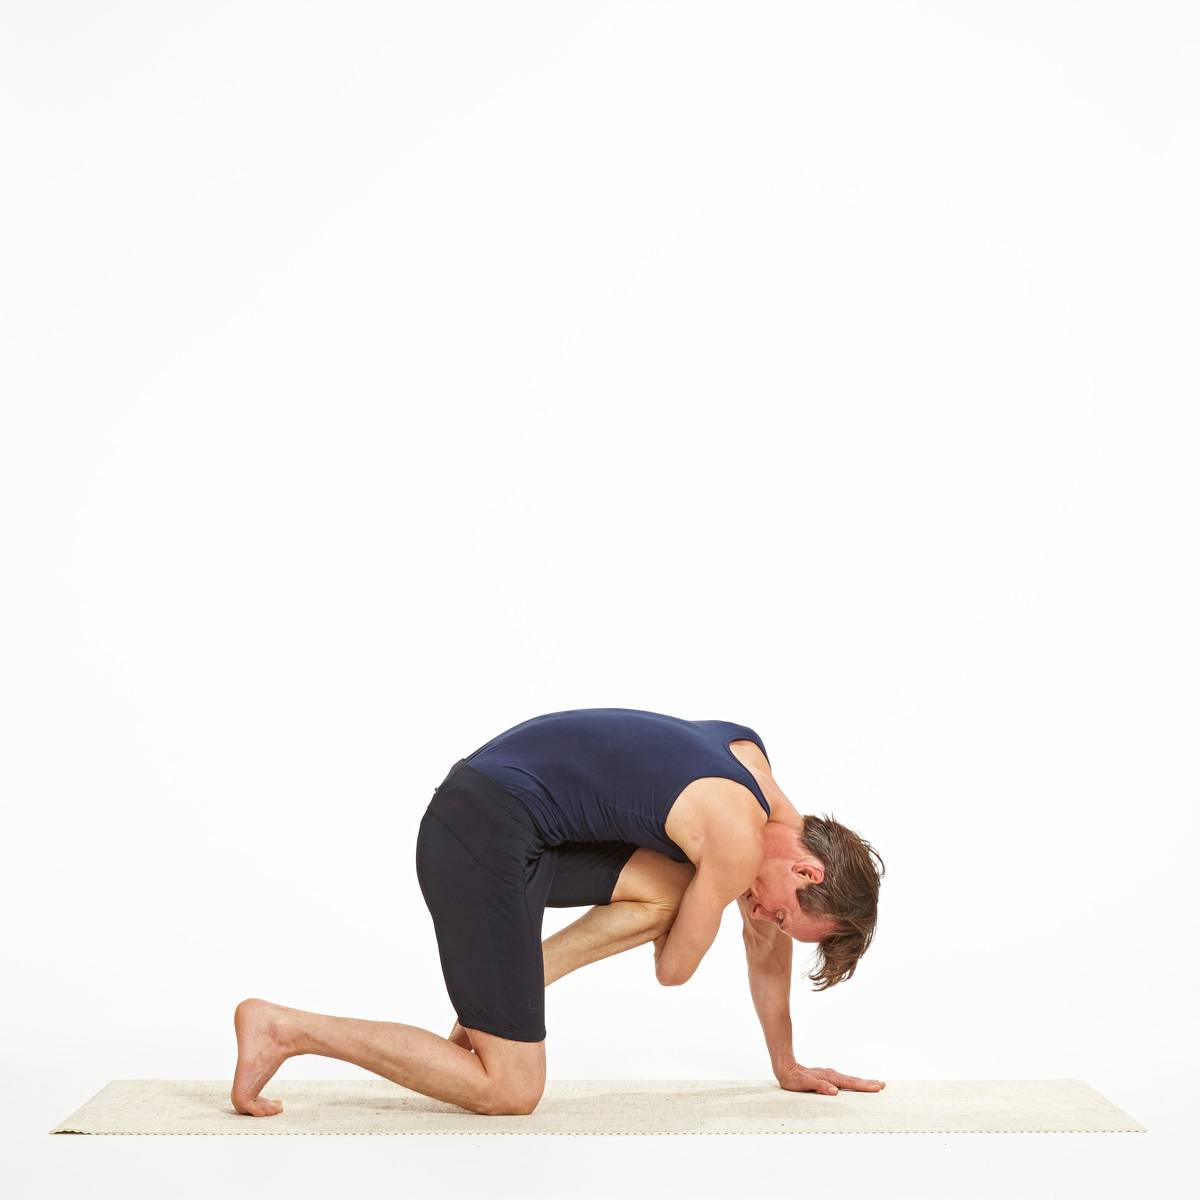 Datta Kriya Yoga - VYAGHRASANA/TIGER POSE: Breathing pattern: Exhale while  bending the head down and bringing the knee close to the face,inhale while  raising the leg and head up. Consciousness: Physical::on breathing